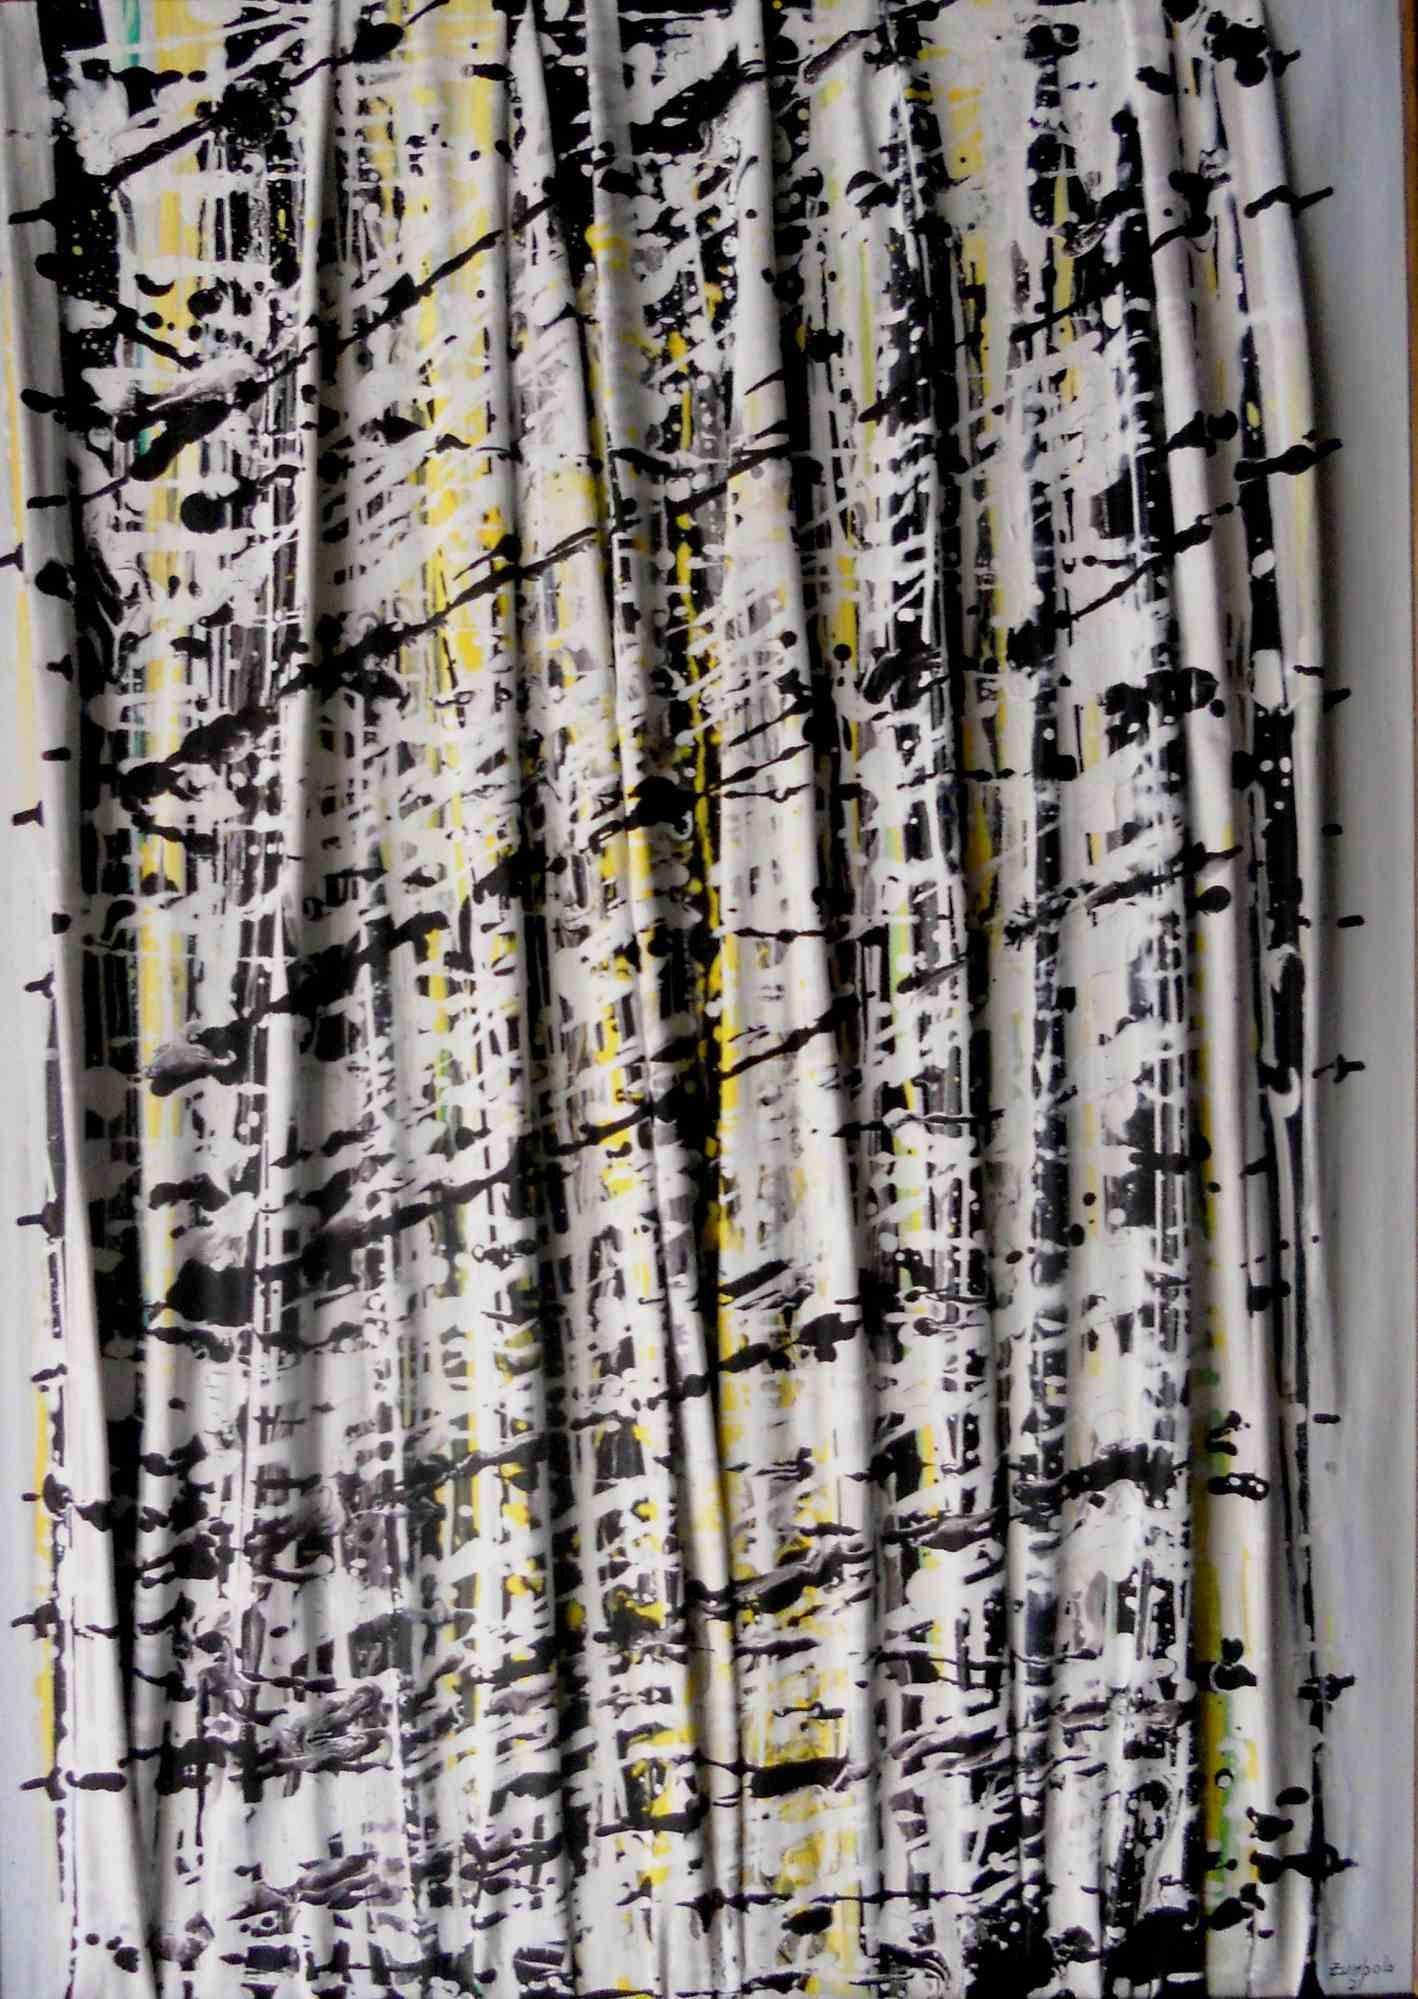 Black and White with Yellow Intrusion is one of the best works of the artist Giuseppe Zumbolo. It is made on canvas, painted in acrylic in 2021.

With frame. The painting is made of acrylic on vertically folded canvas. The folds of the canvas, made